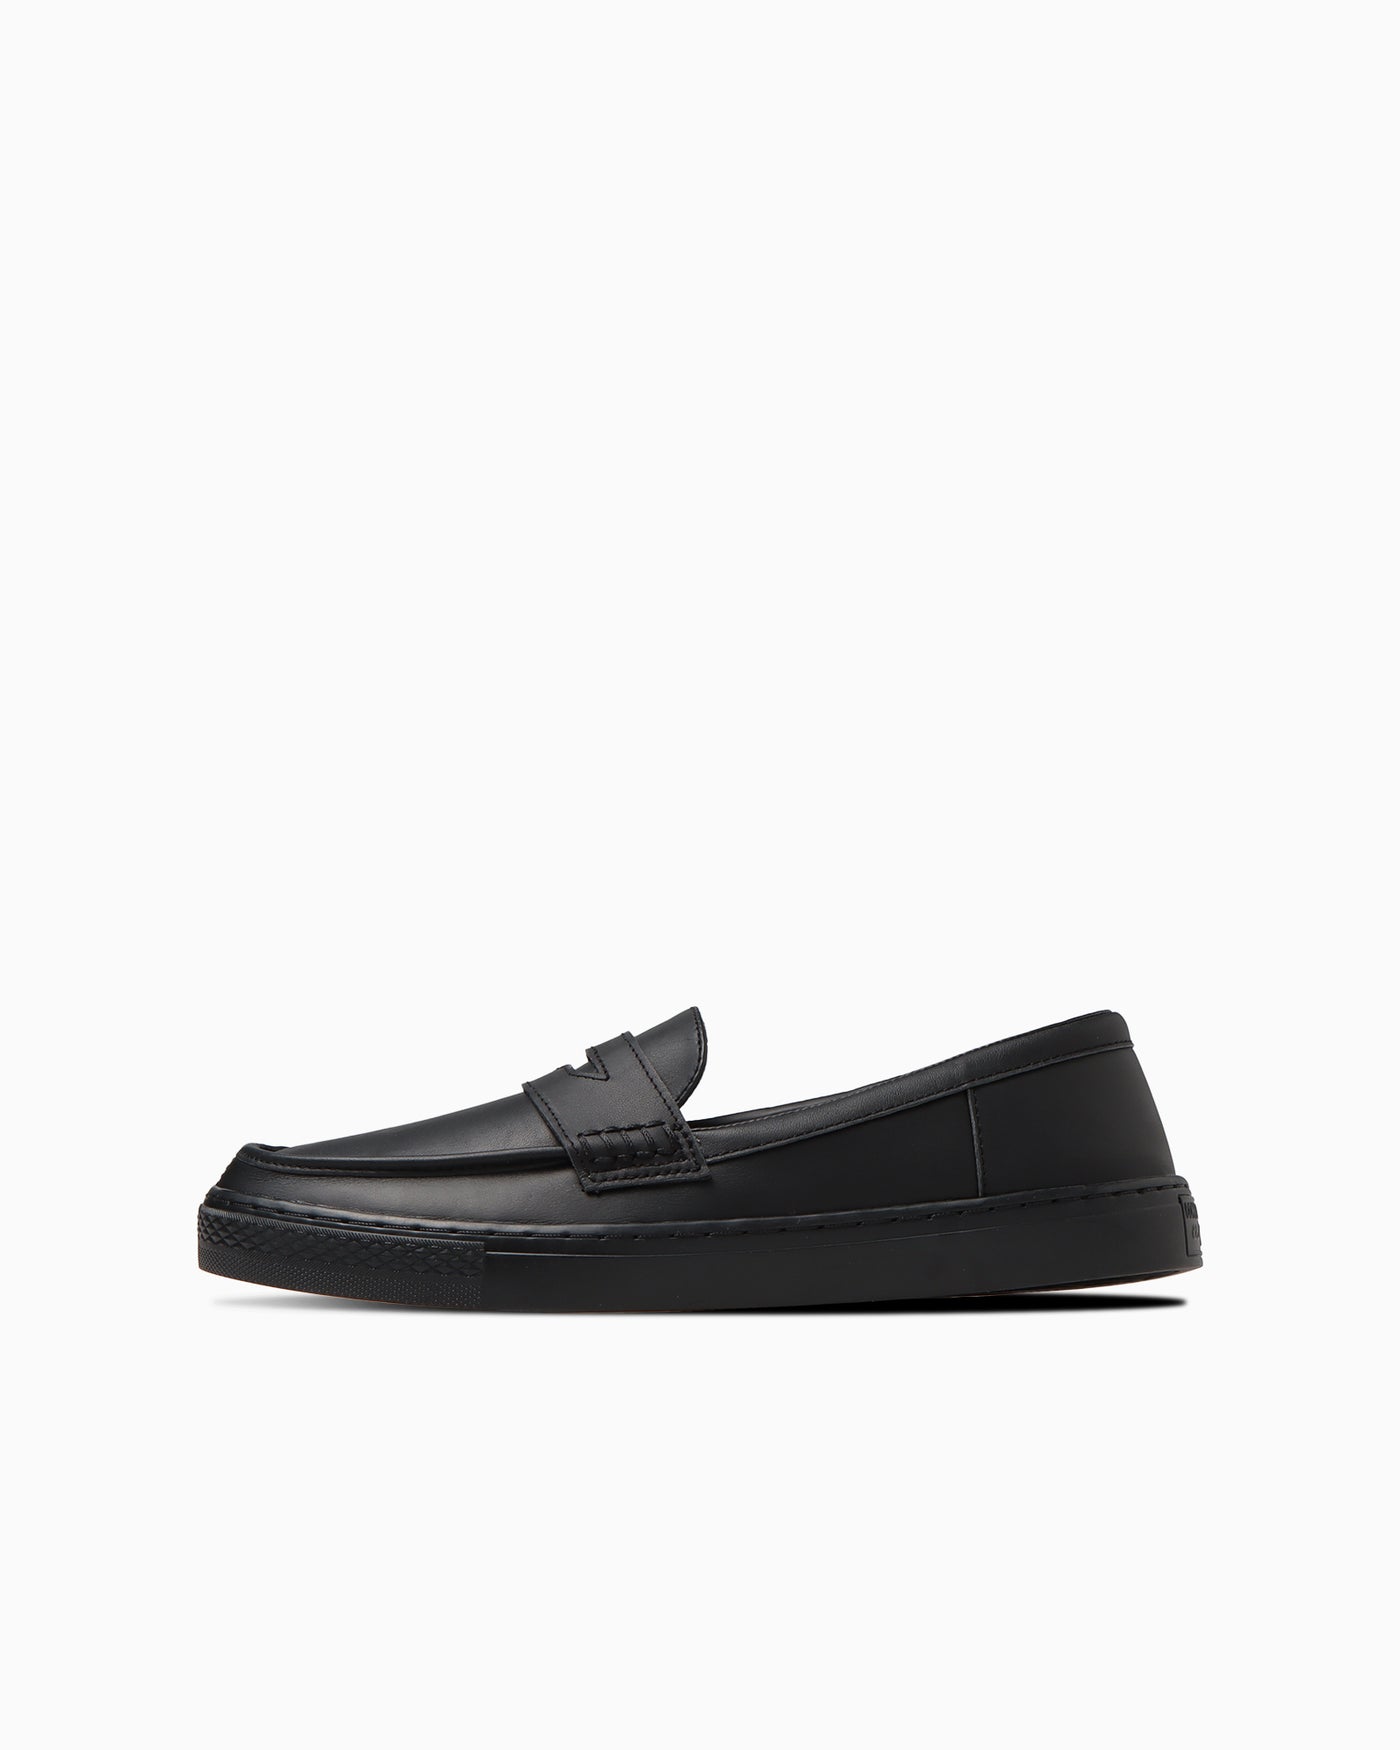 CONVERSE ALL STAR COUPE LOAFER BLACK